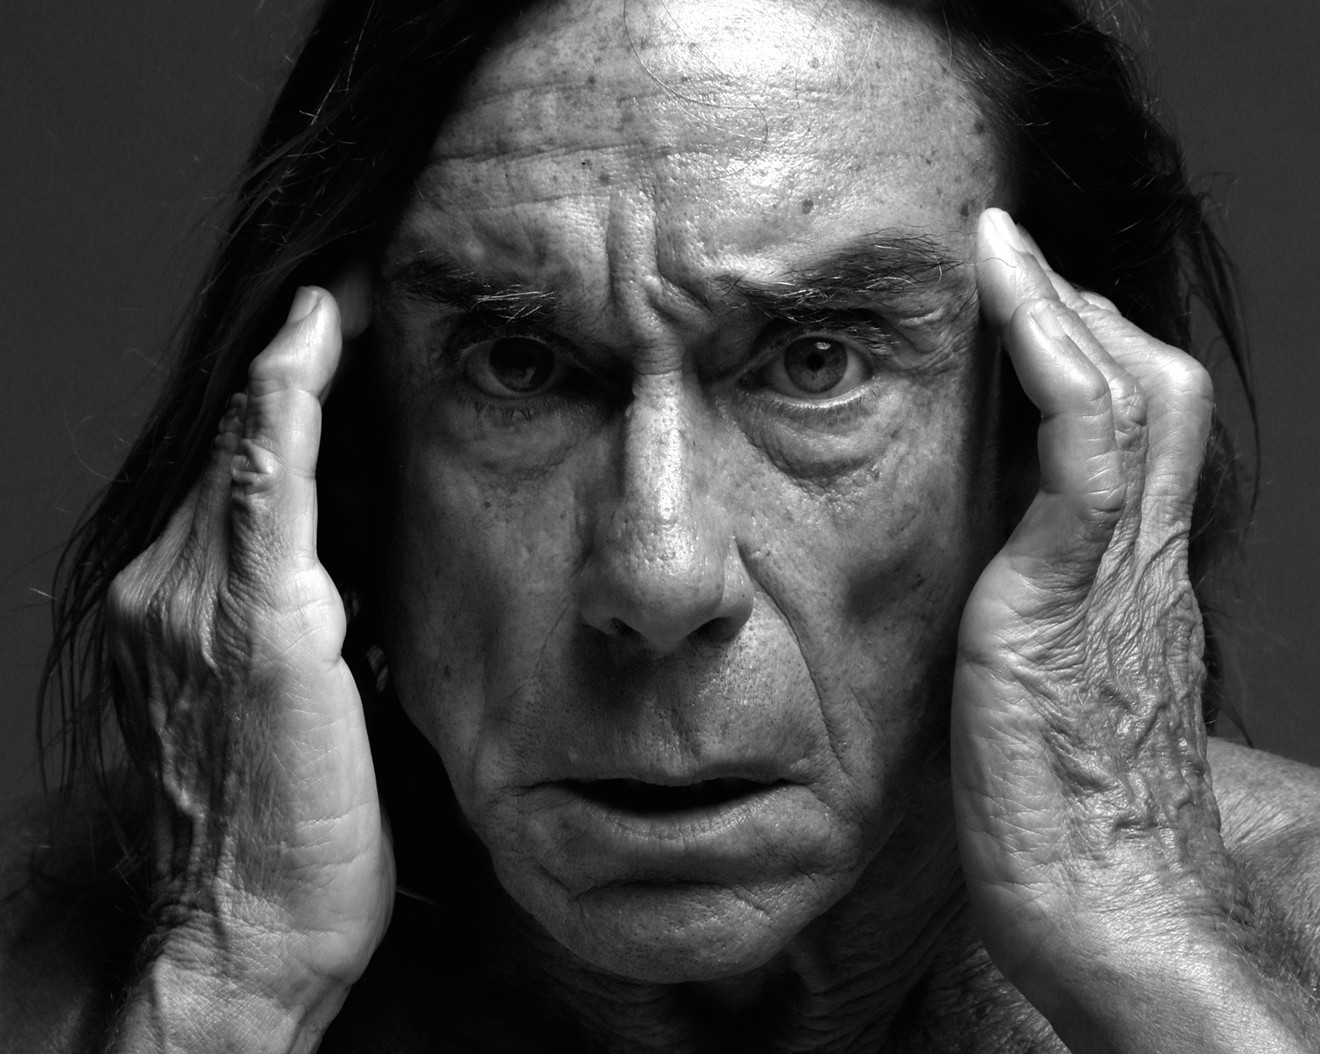 Meet the one of rock's greatest all-time frontmen: Iggy Pop.